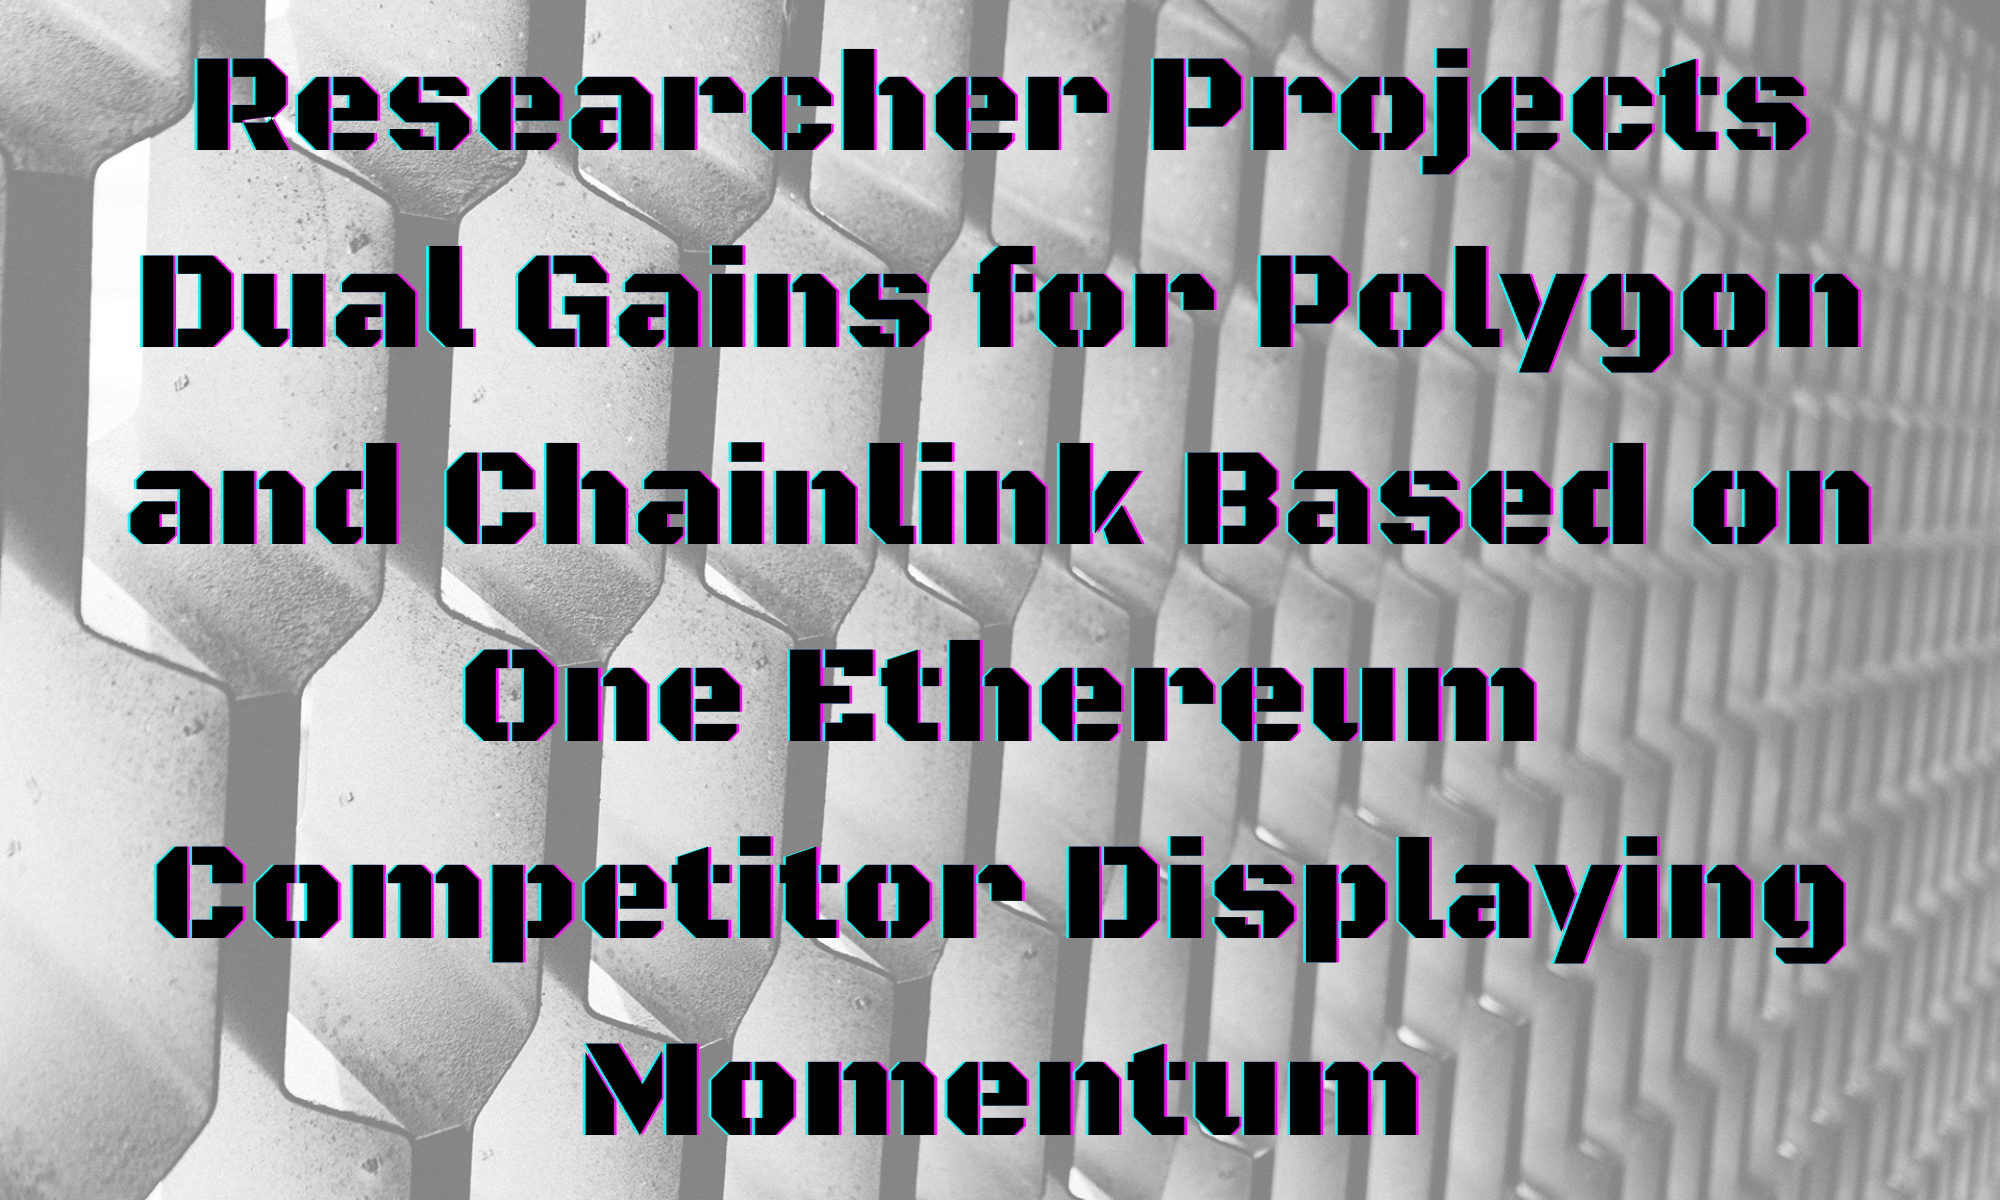 @heskay/researcher-projects-dual-gains-for-polygon-and-chainlink-based-on-one-ethereum-competitor-displaying-momentum